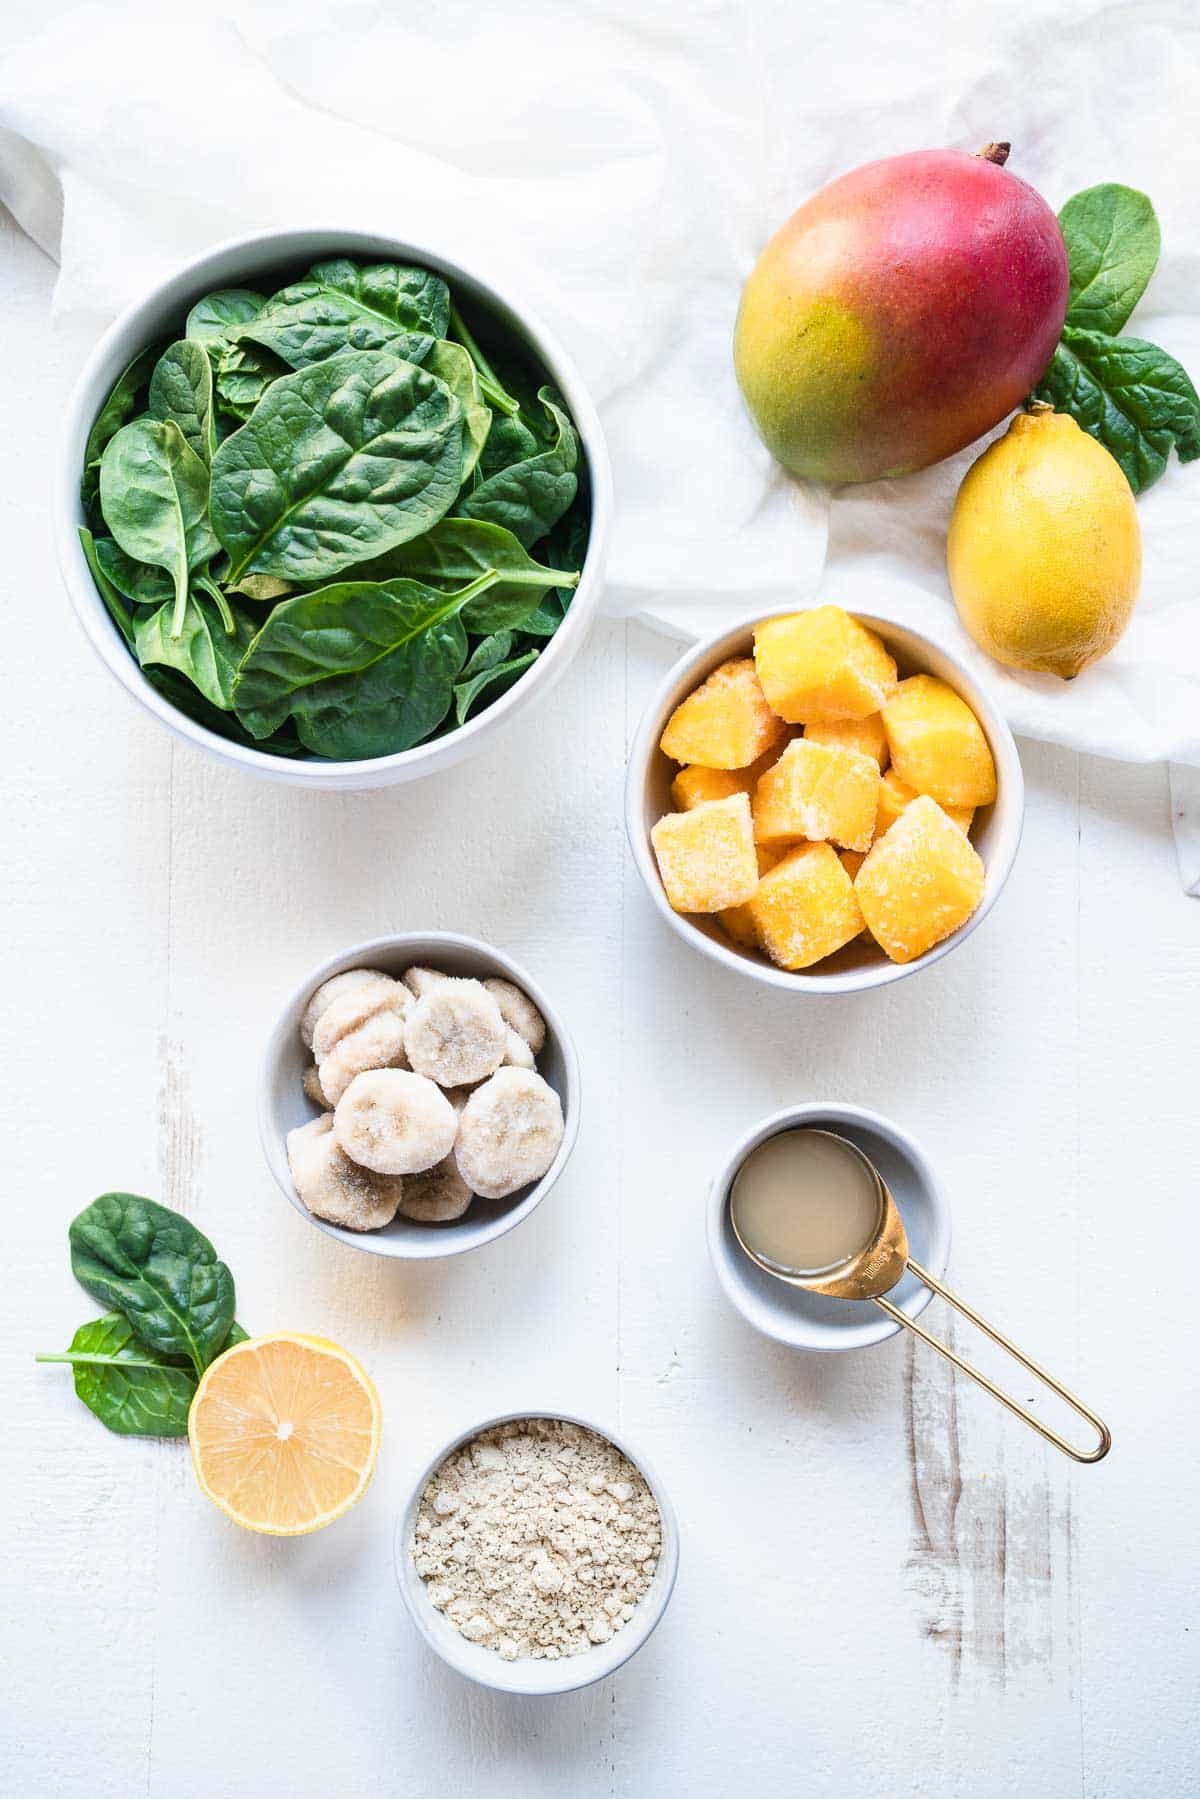 Ingredients for a mango spinach smoothie on a white table.